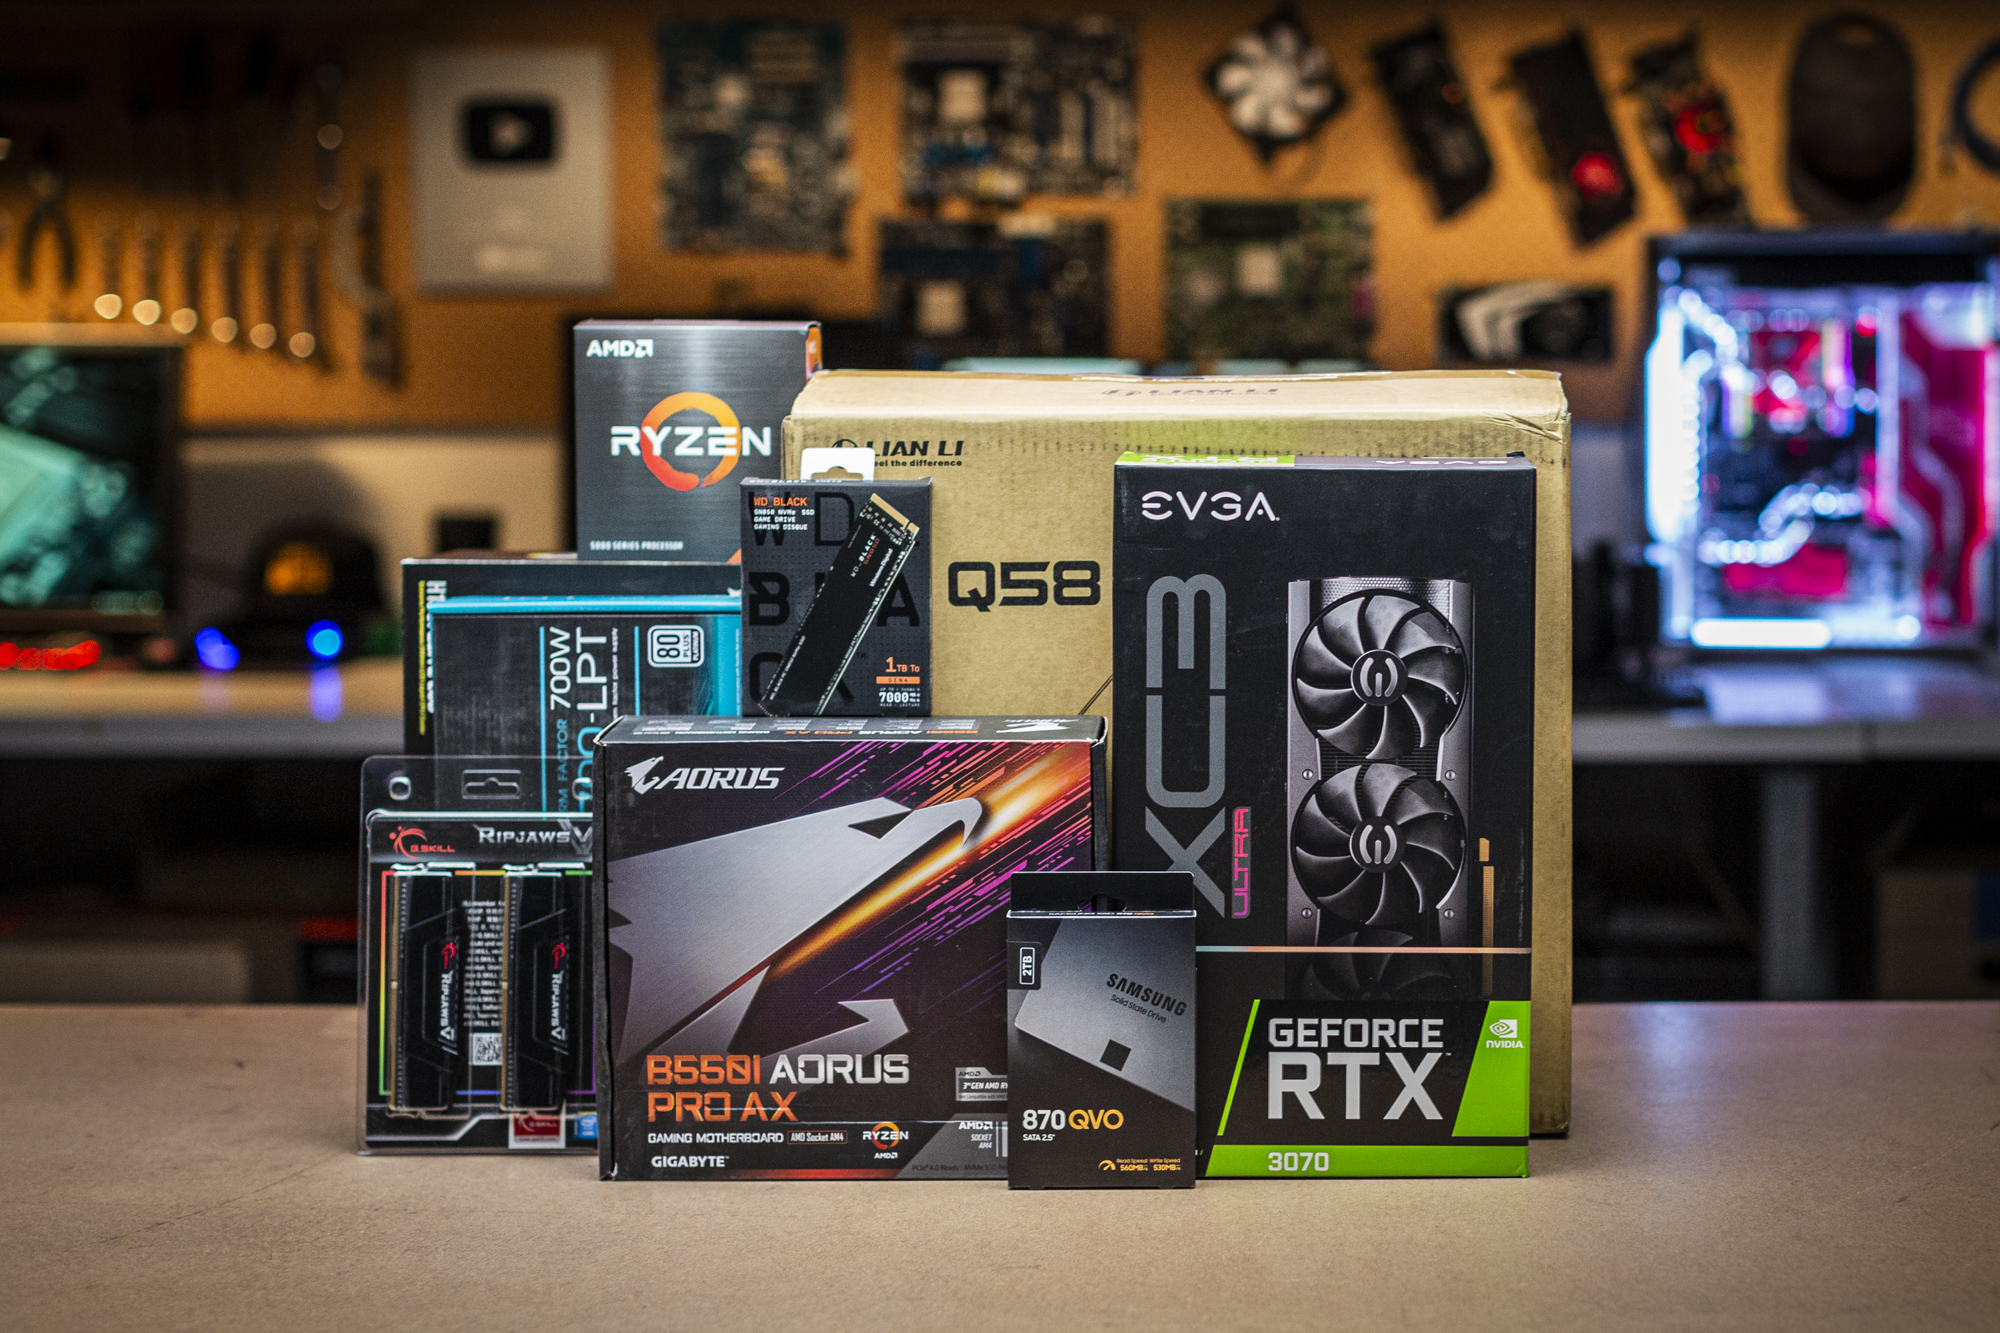 4K power, tiny box: Watch me build my first small form factor gaming PC